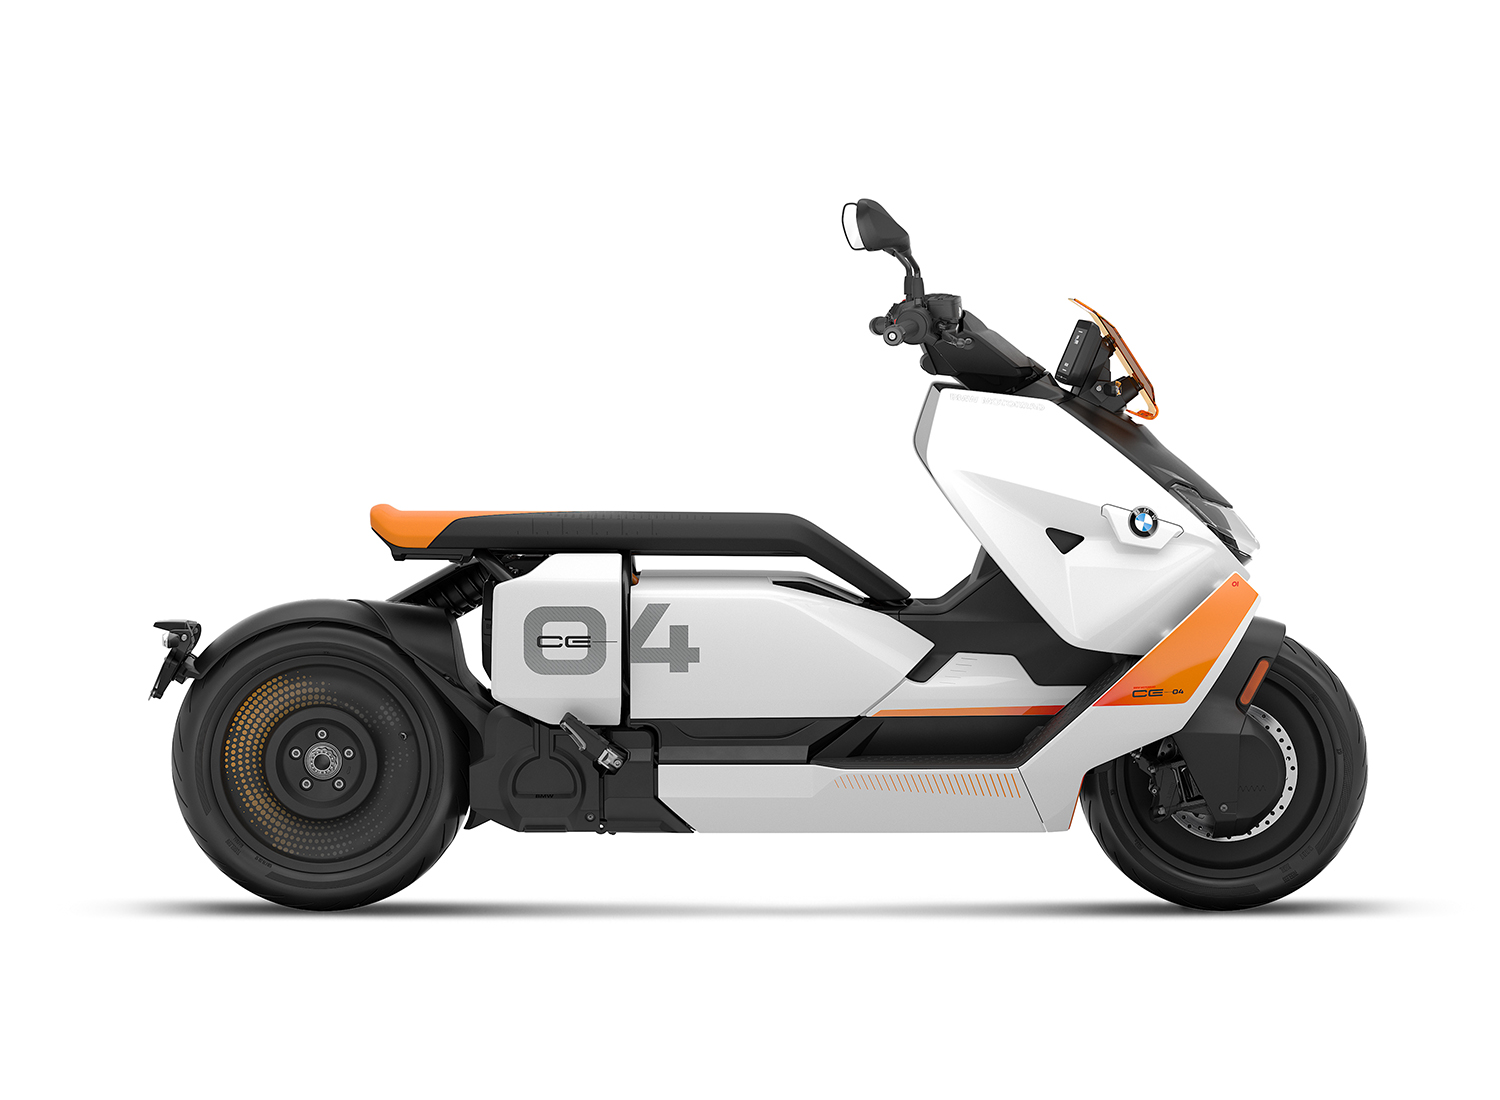 Kig forbi af rygrad BMW CE 04 Electric Scooter | First Look Review | Rider Magazine